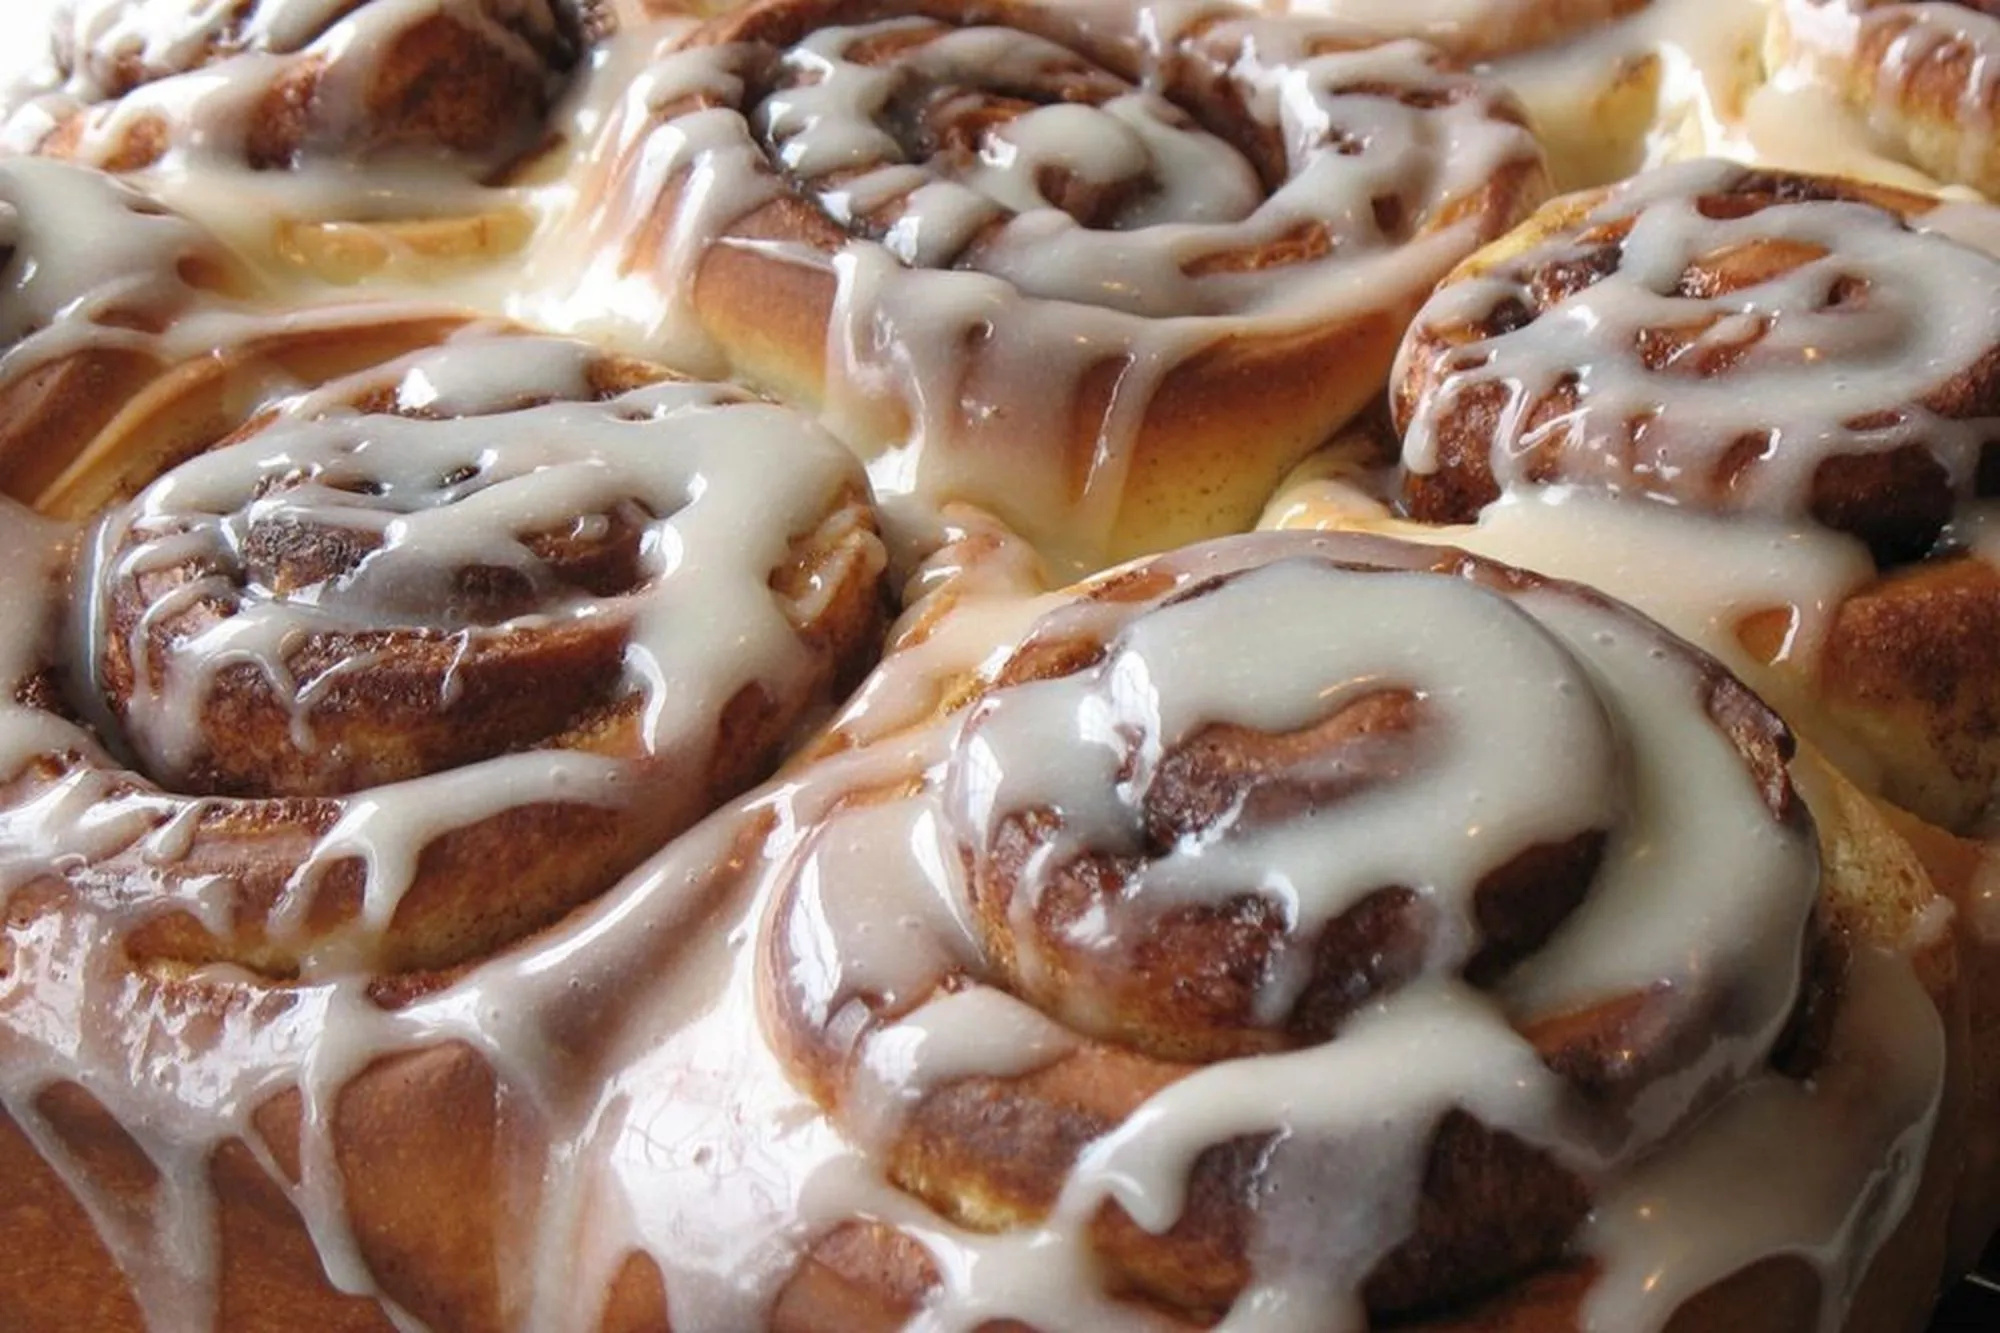 Cinnamon roll: The dough is rolled up tightly, creating a spiral pastry and filling. 2000x1340 HD Wallpaper.